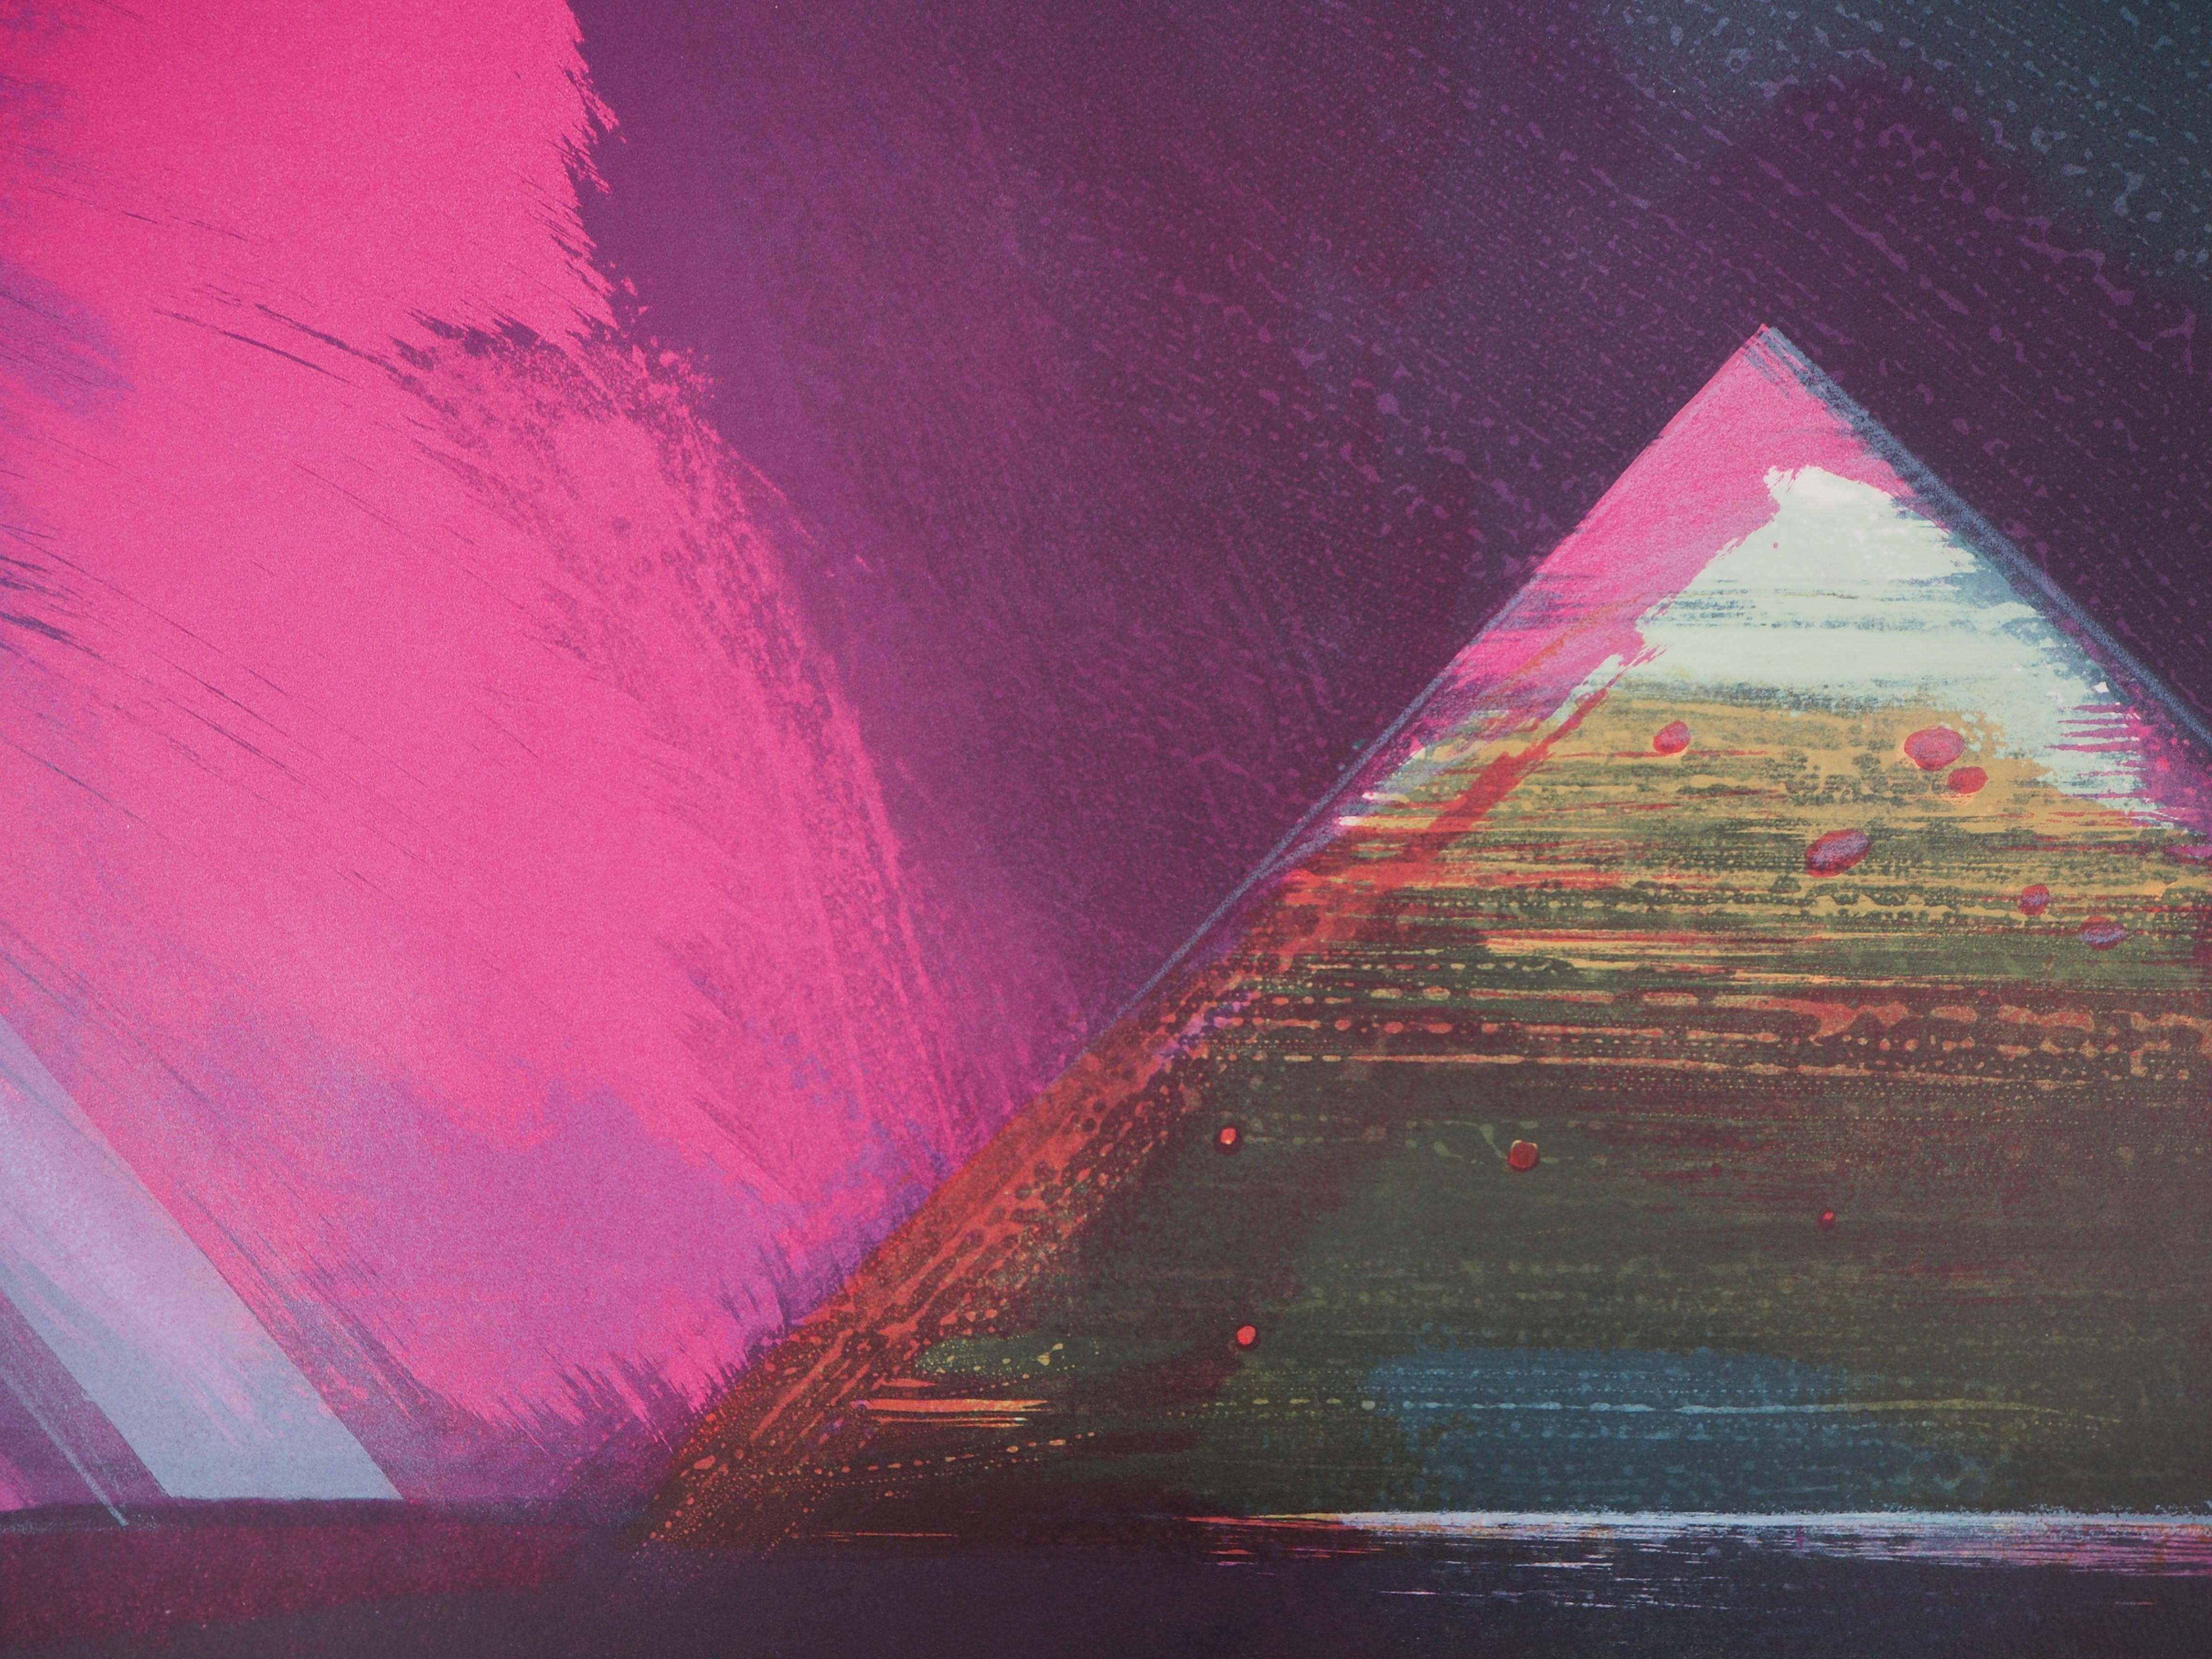 Egypt : Great Pyramid of Kheops - Original handsigned lithograph, Ltd 175 proofs - Black Landscape Print by Claude HASTAIRE